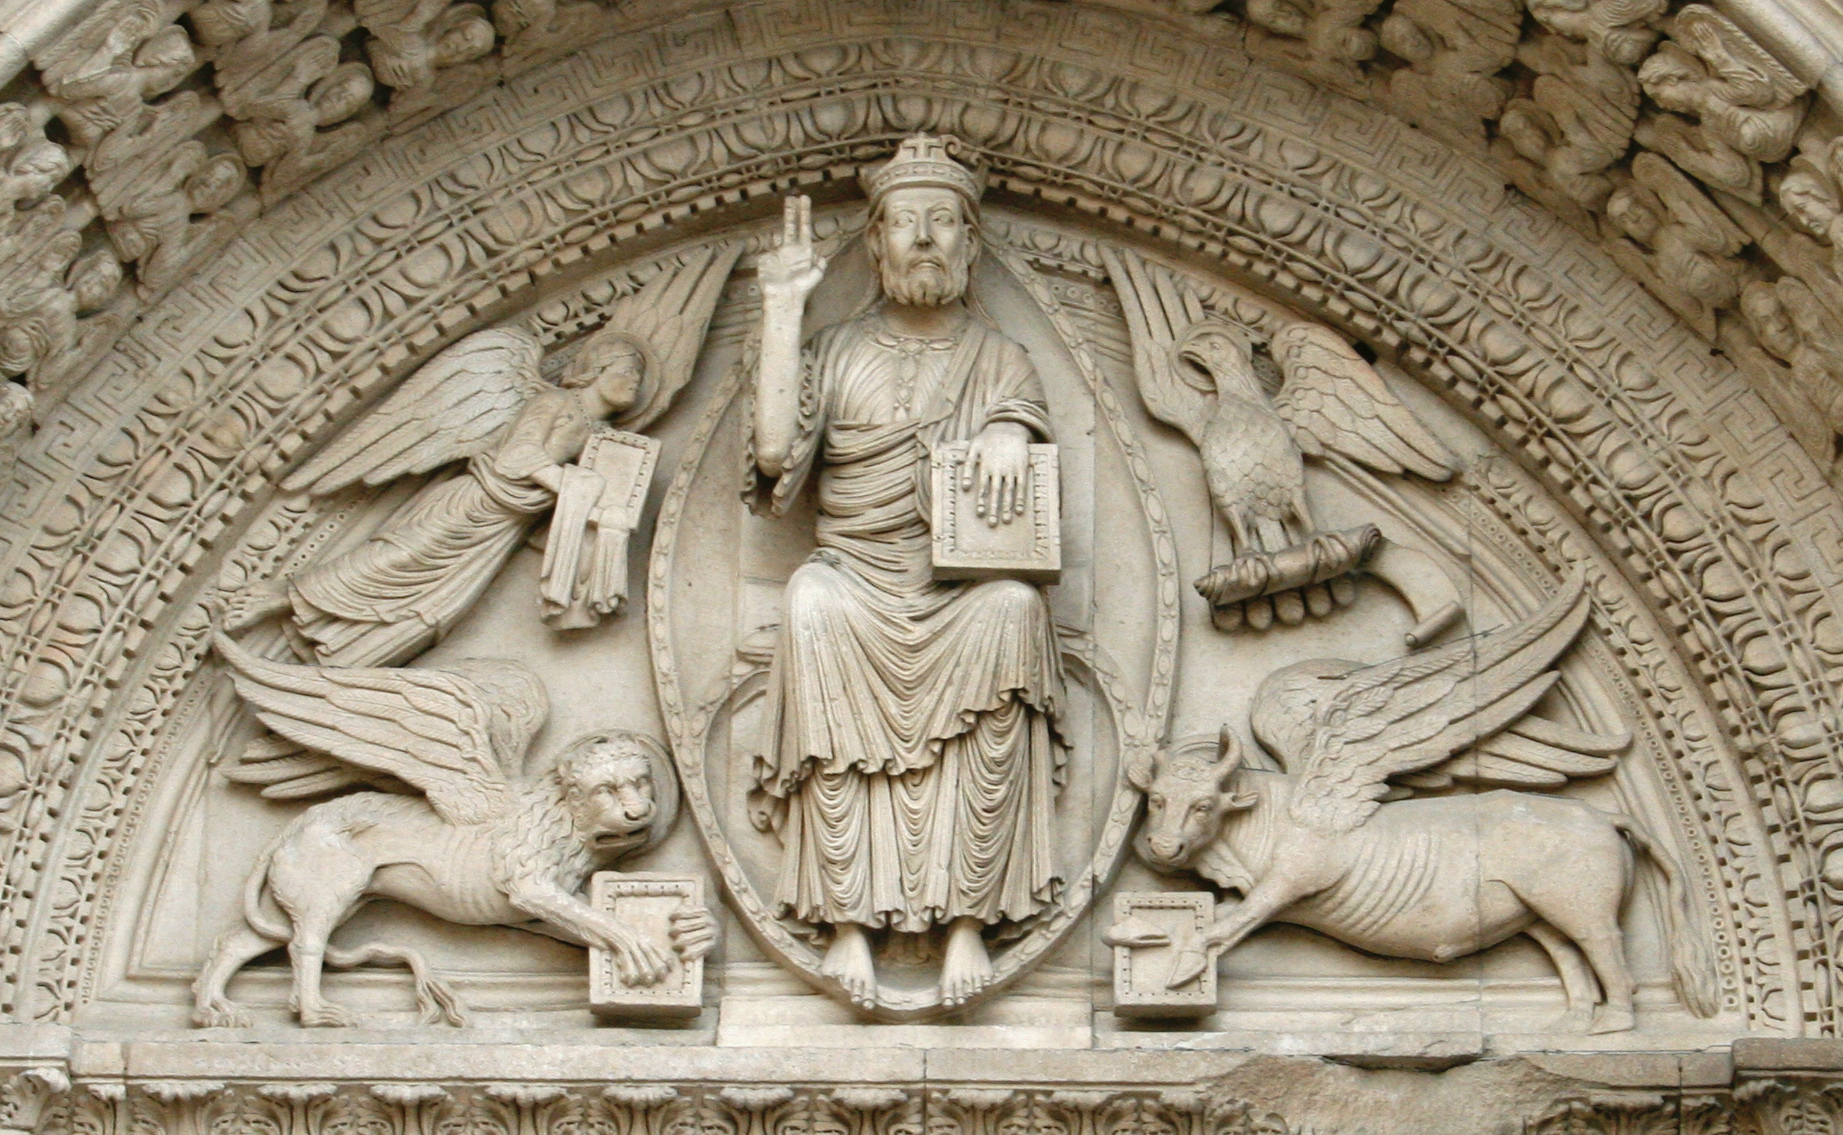 Christ between the Emblems of the Four Evangelists